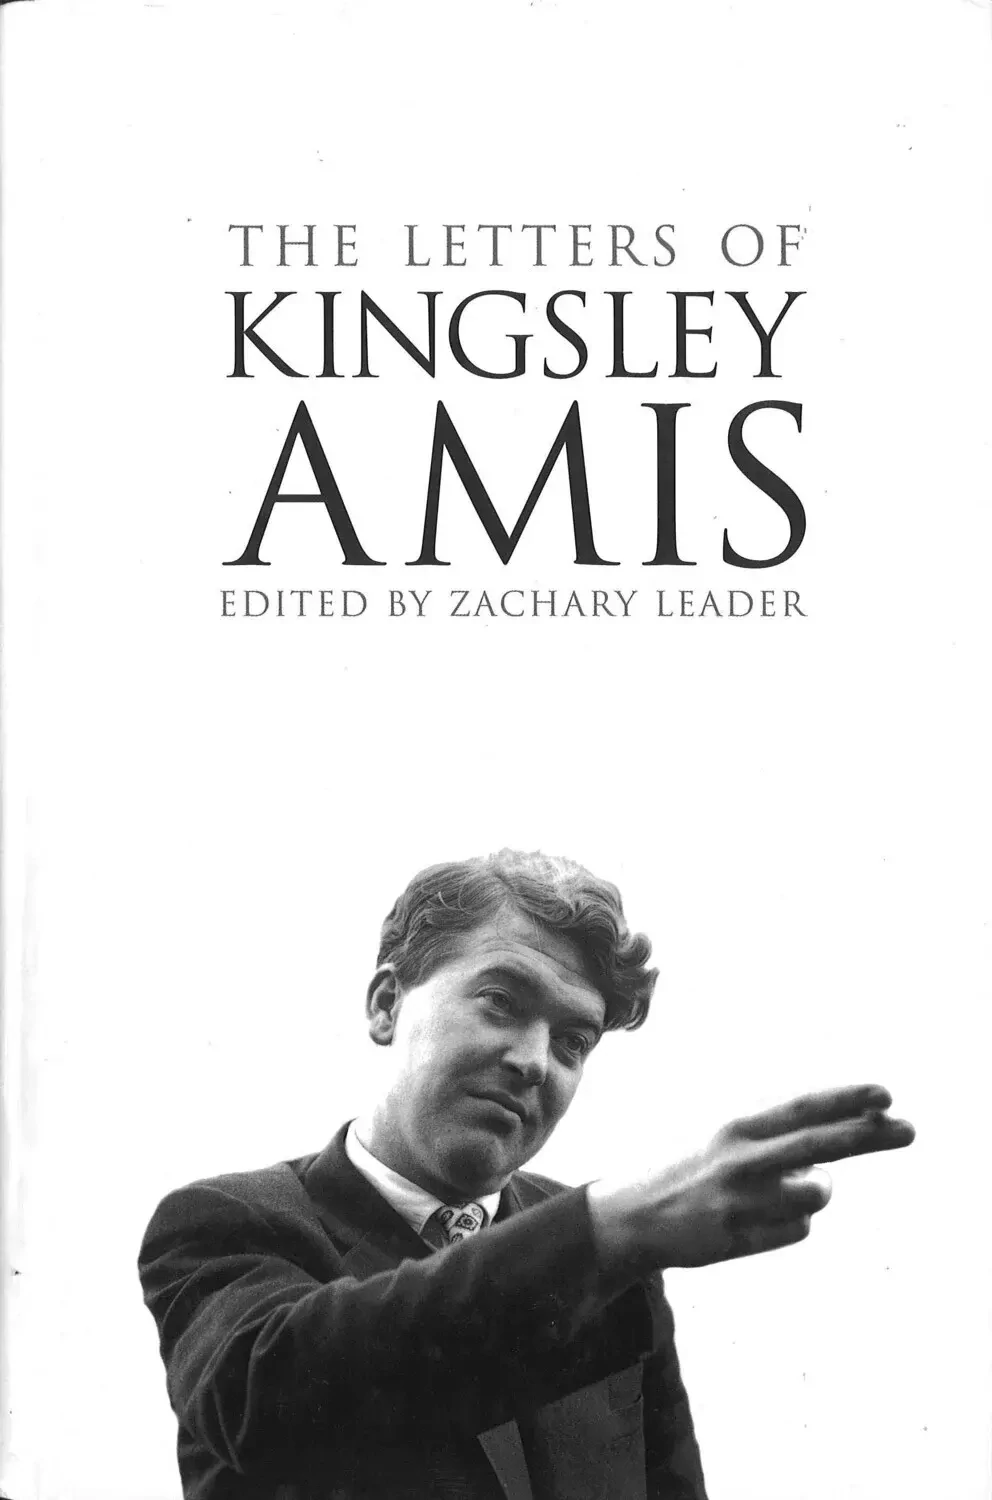 The Letters of Kingsley Amis